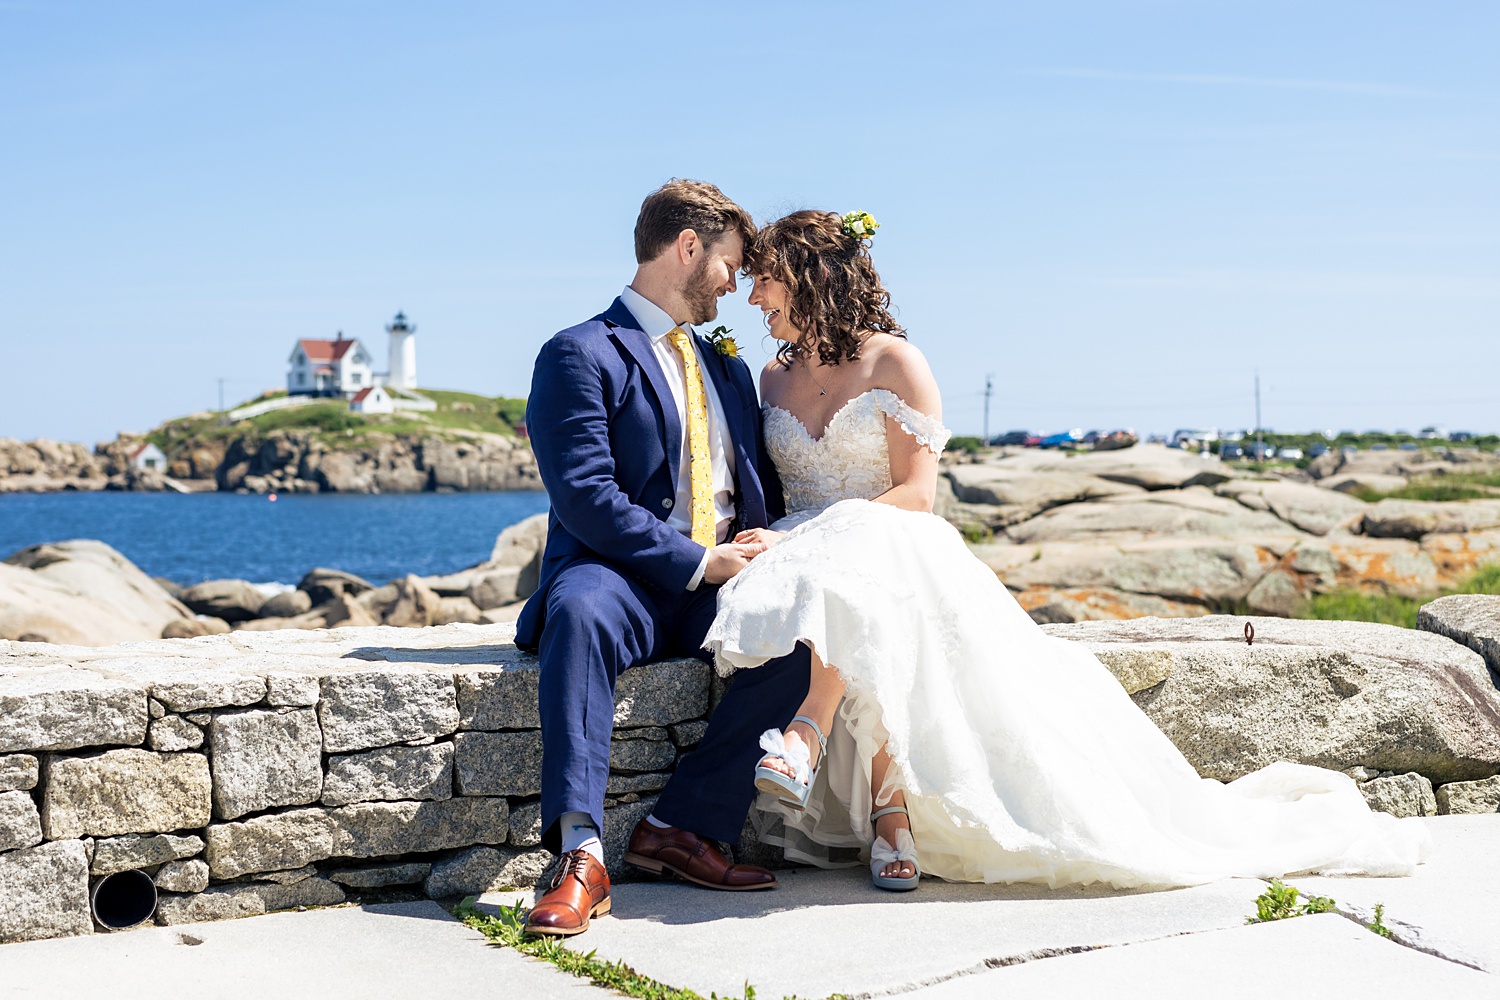 The bride and groom sit with a view of the Nubble Lighthouse in York Maine